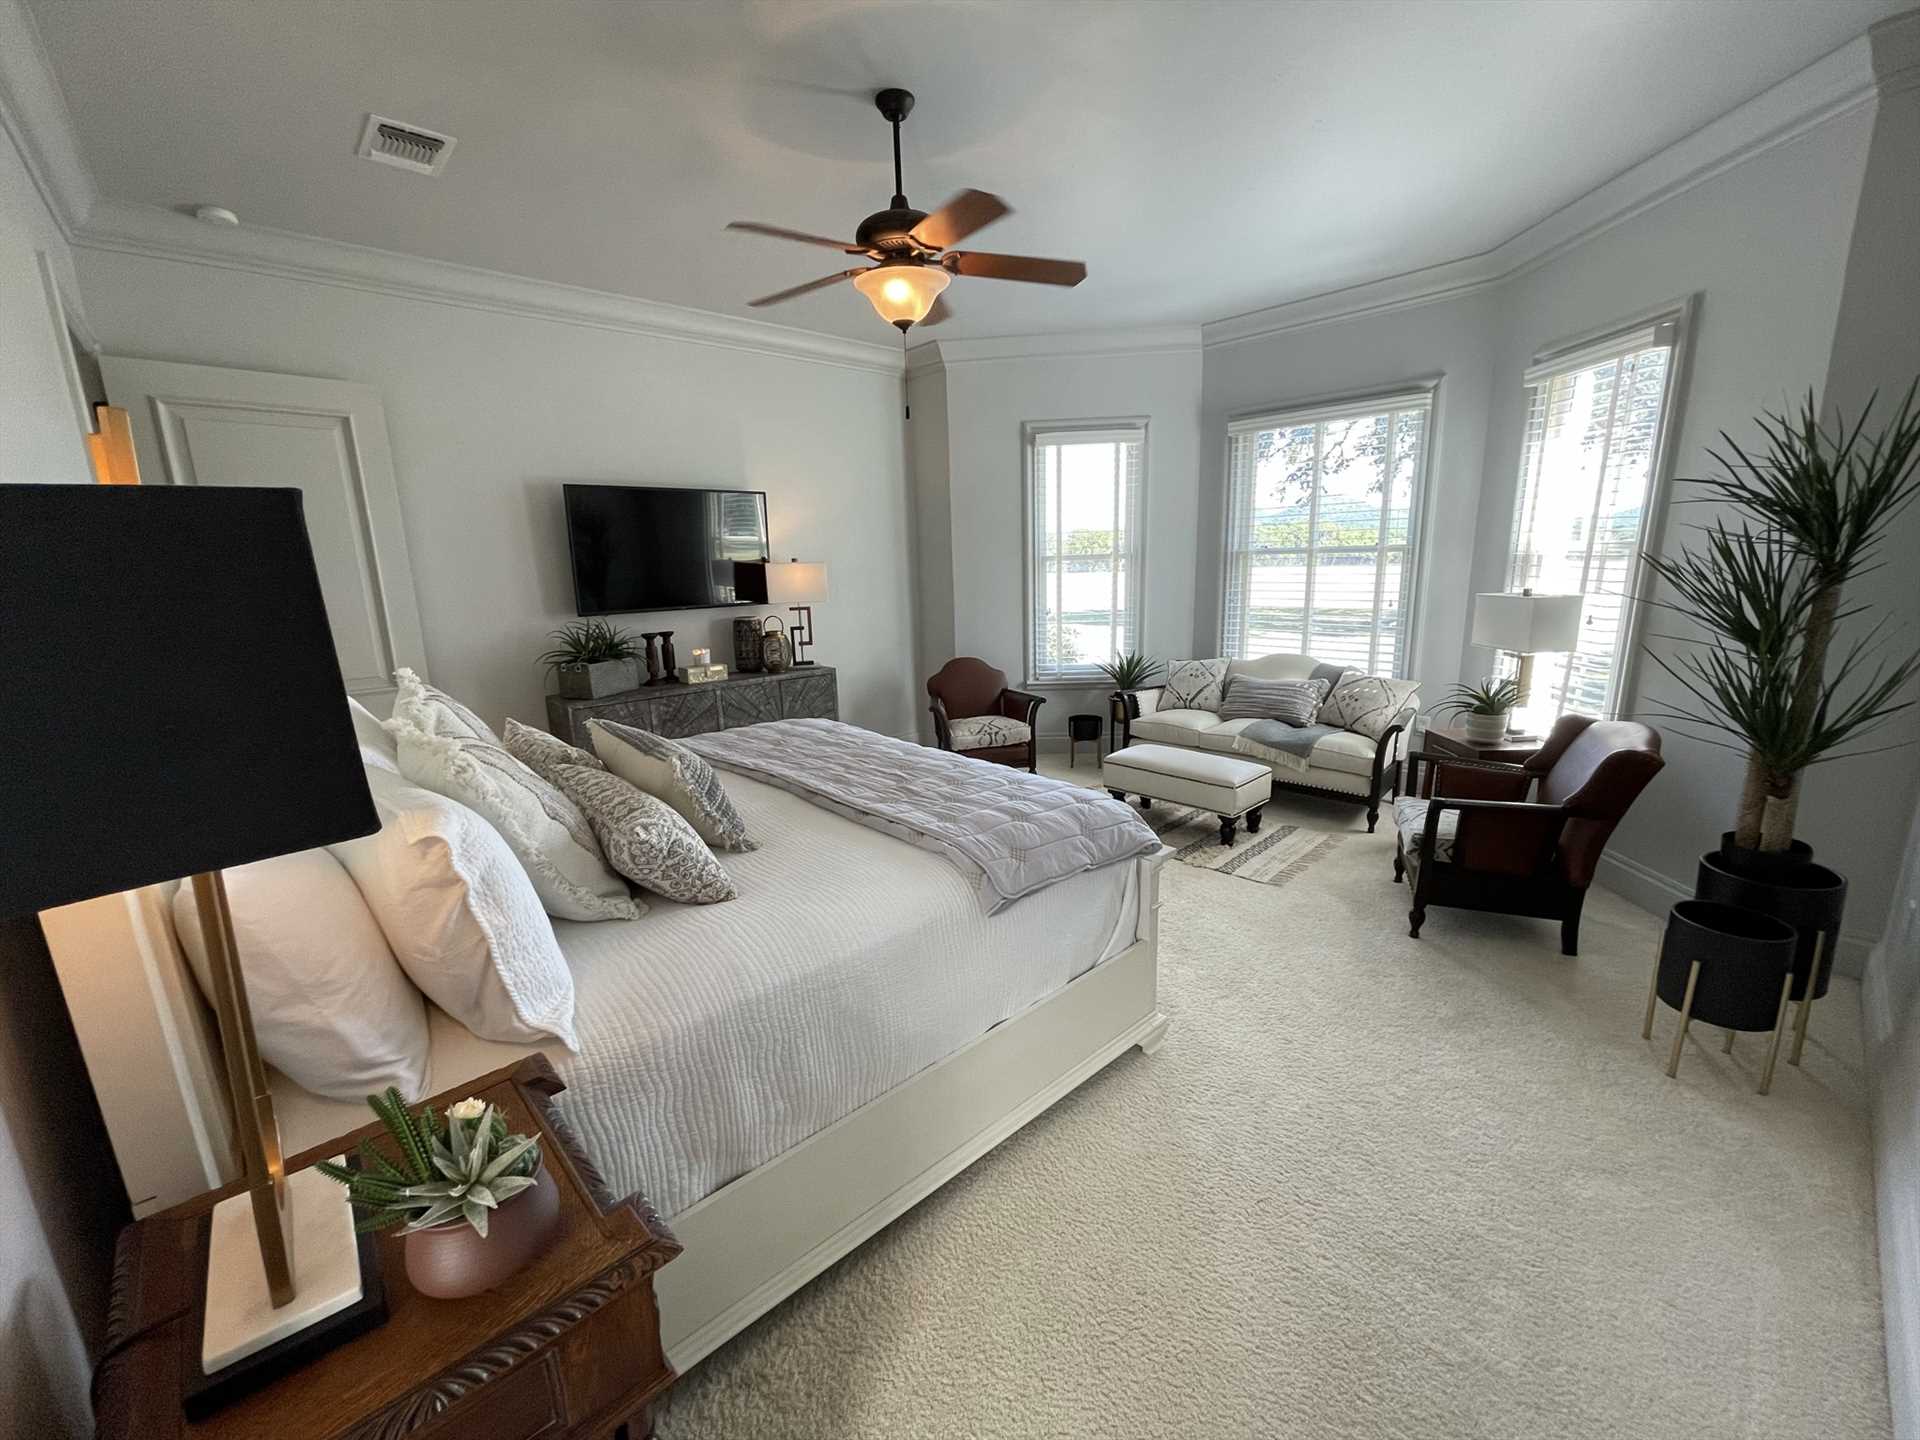                                                 Cushioned and pampered comfort greets you in the master bedroom, with a huge king-sized bed and furniture suite!